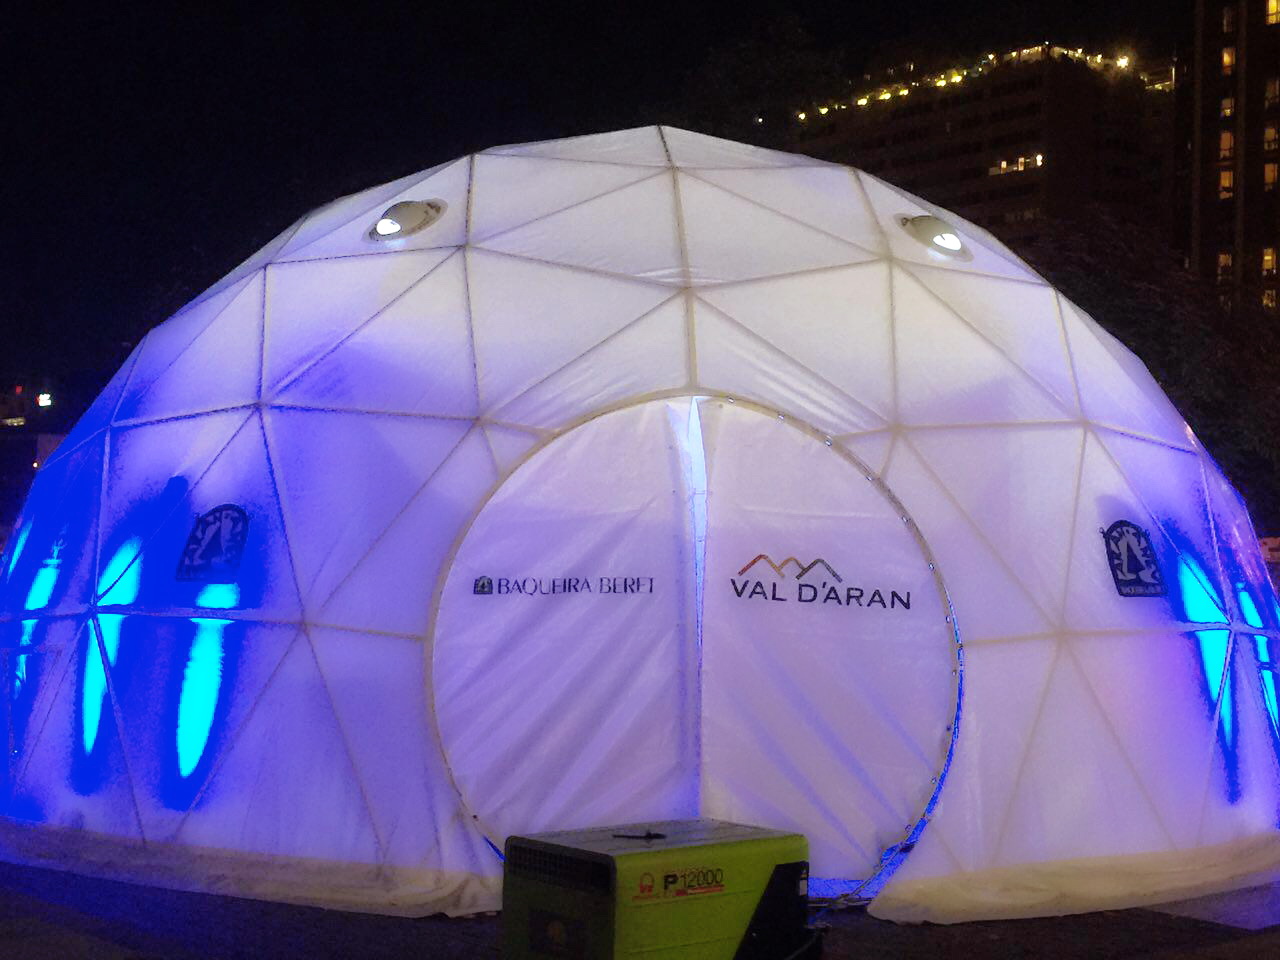 Portable Dome Ø8m for Baqueira Beret, The Largest Ski Resort in Spain